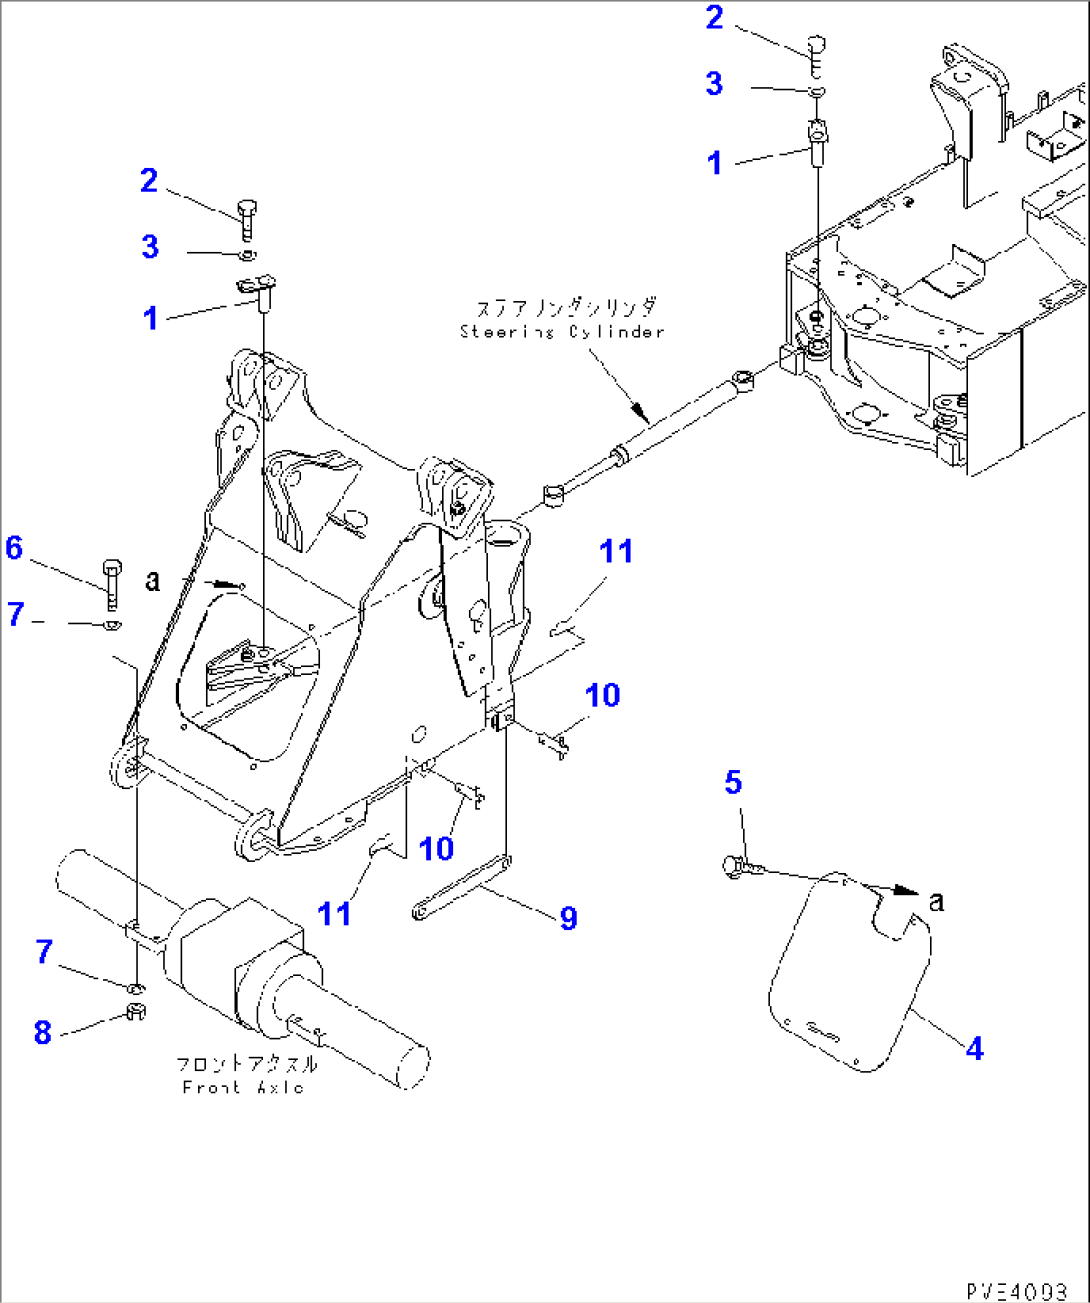 LOCK AND COVER (FOR FRONT AND REAR FRAME) (FOR 3-SPOOL CONTROL VALVE)